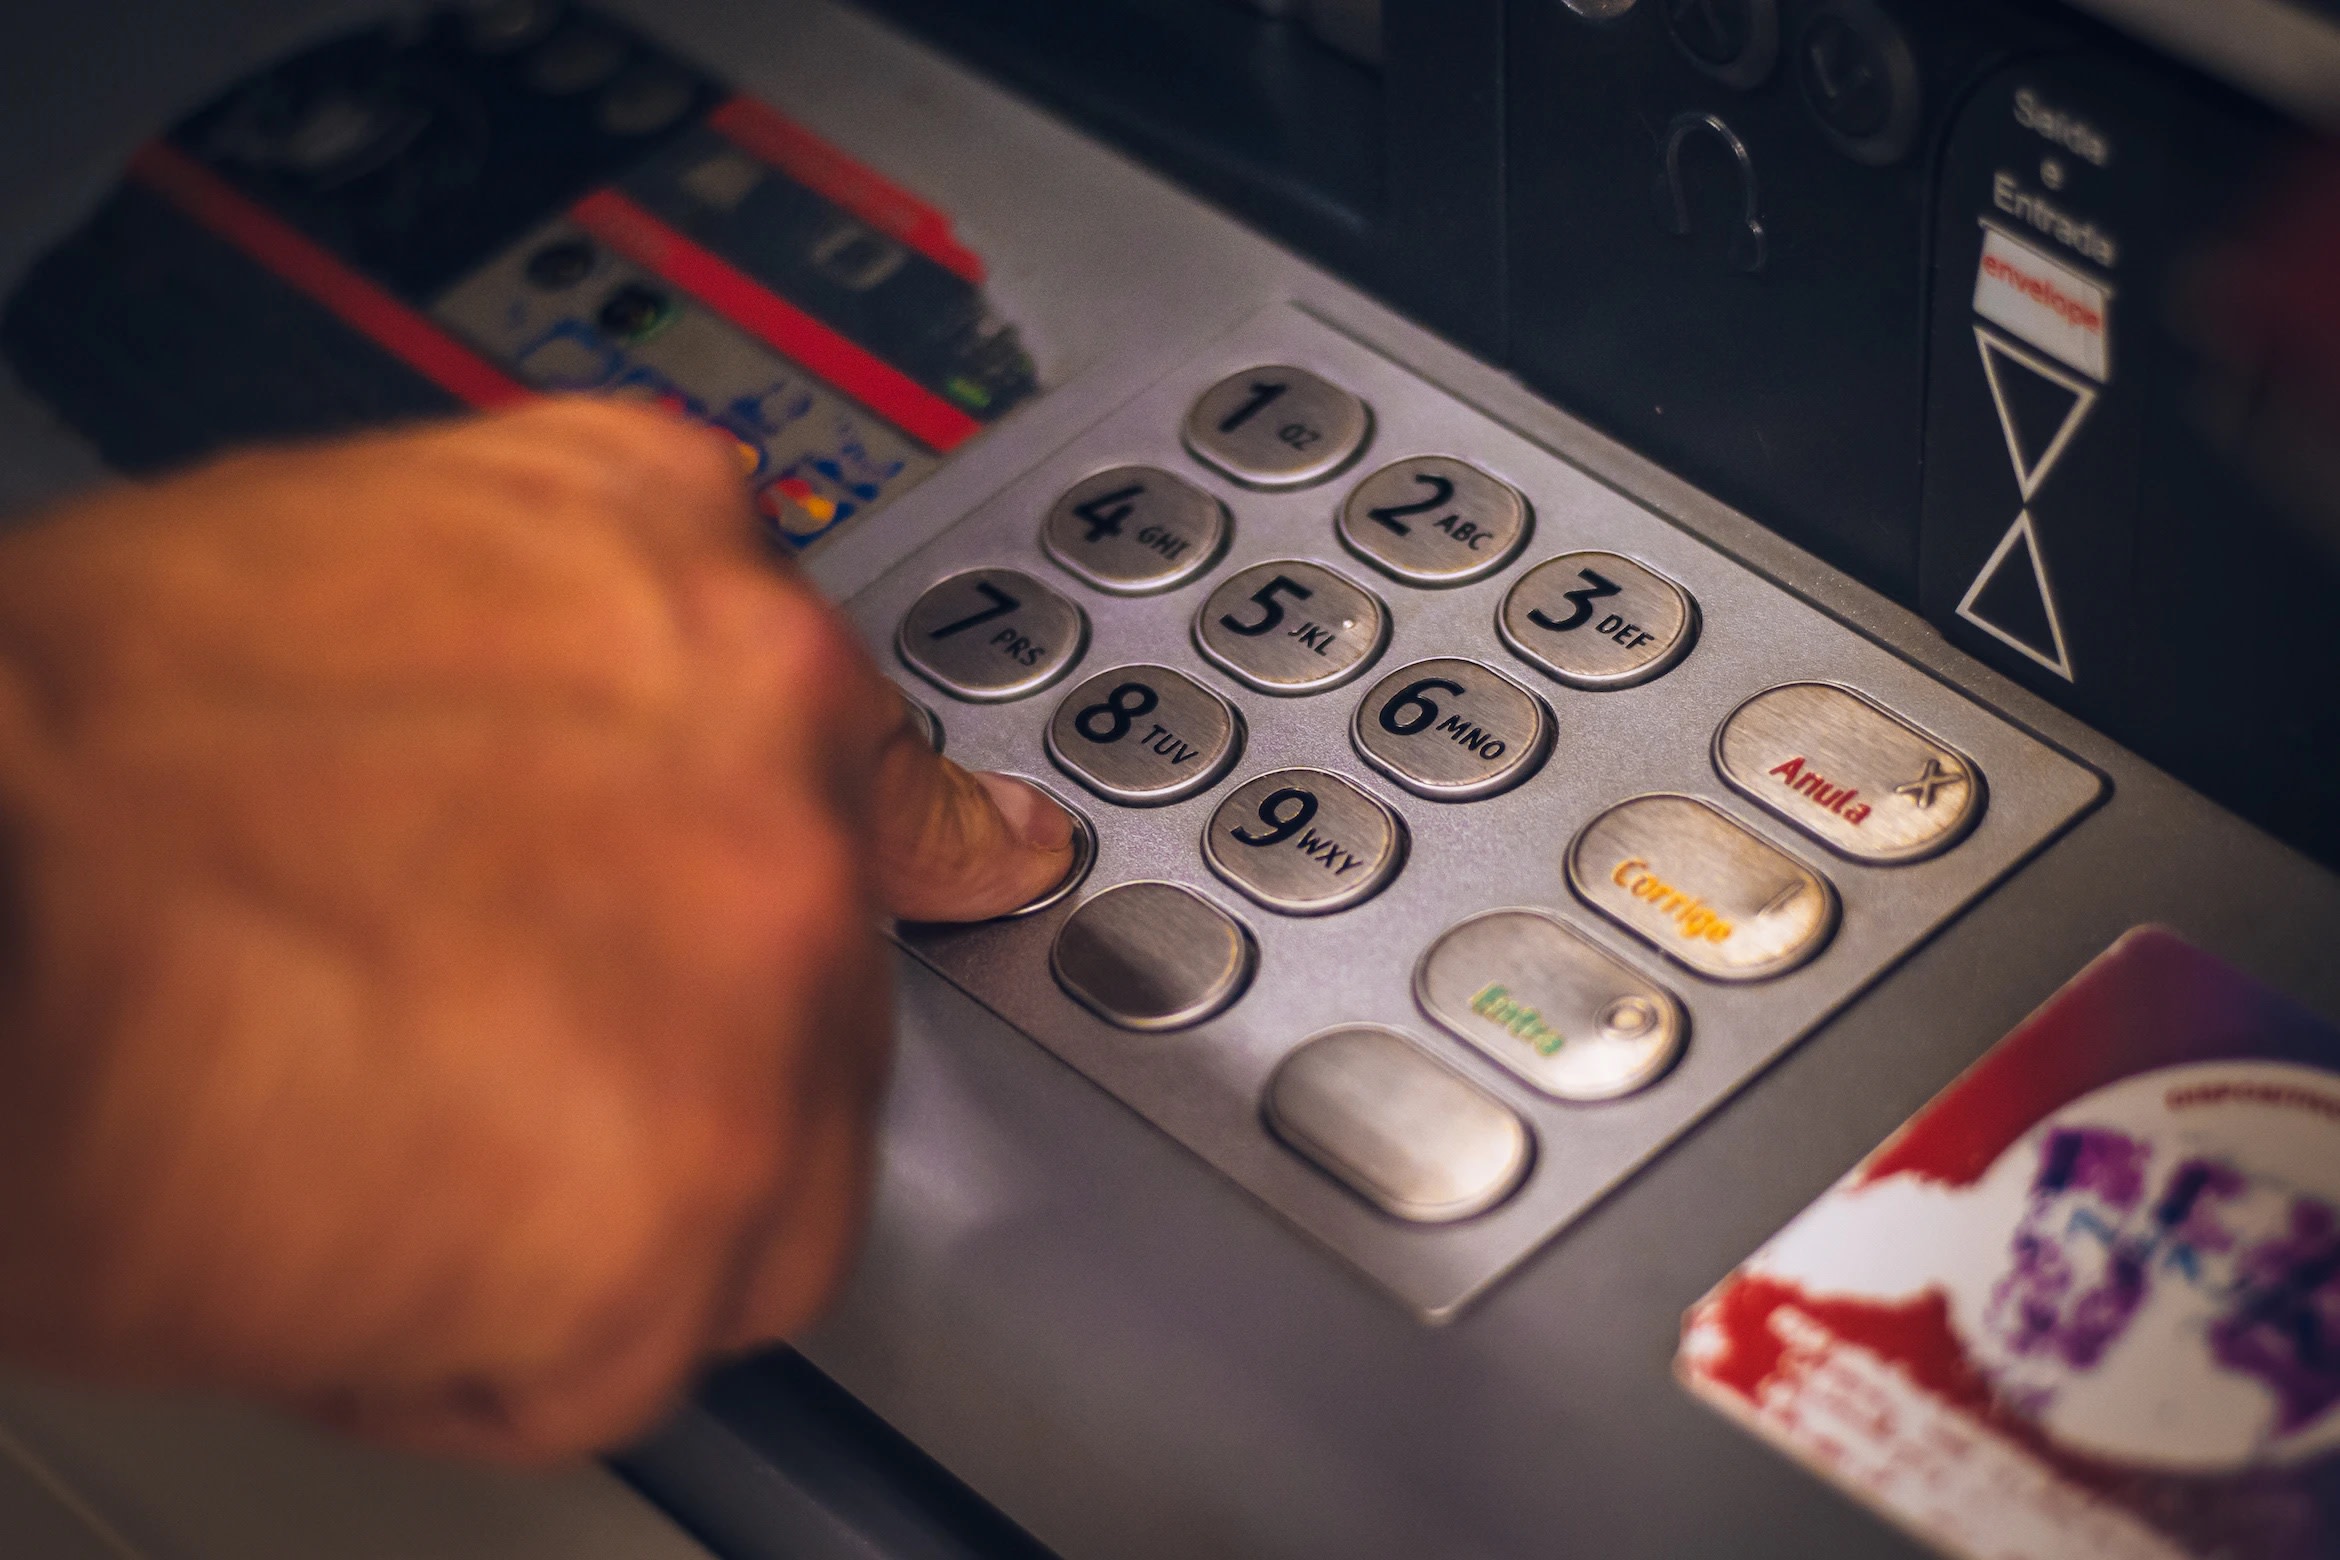 Image of ATM console with buttons being pressed by hand